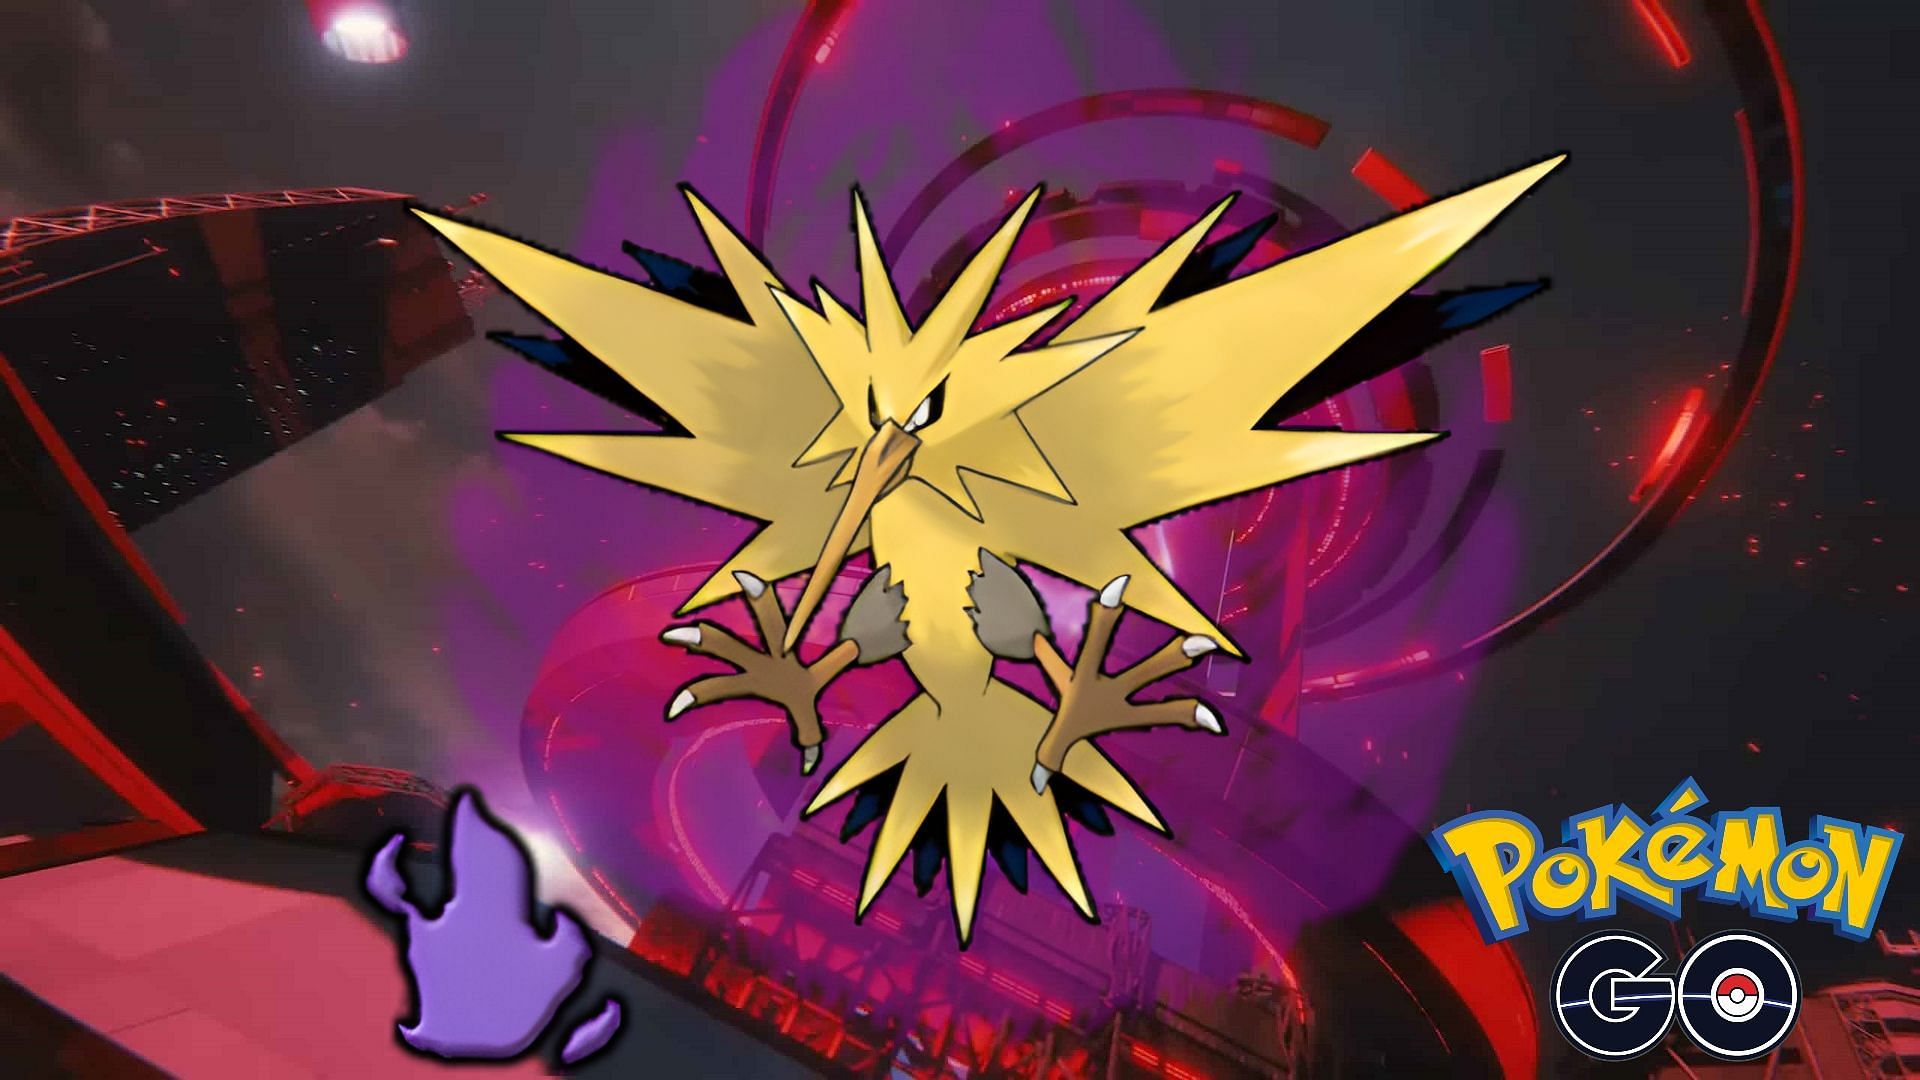 Shadow Zapdos was introduced to Pokemon GO in December 2019.